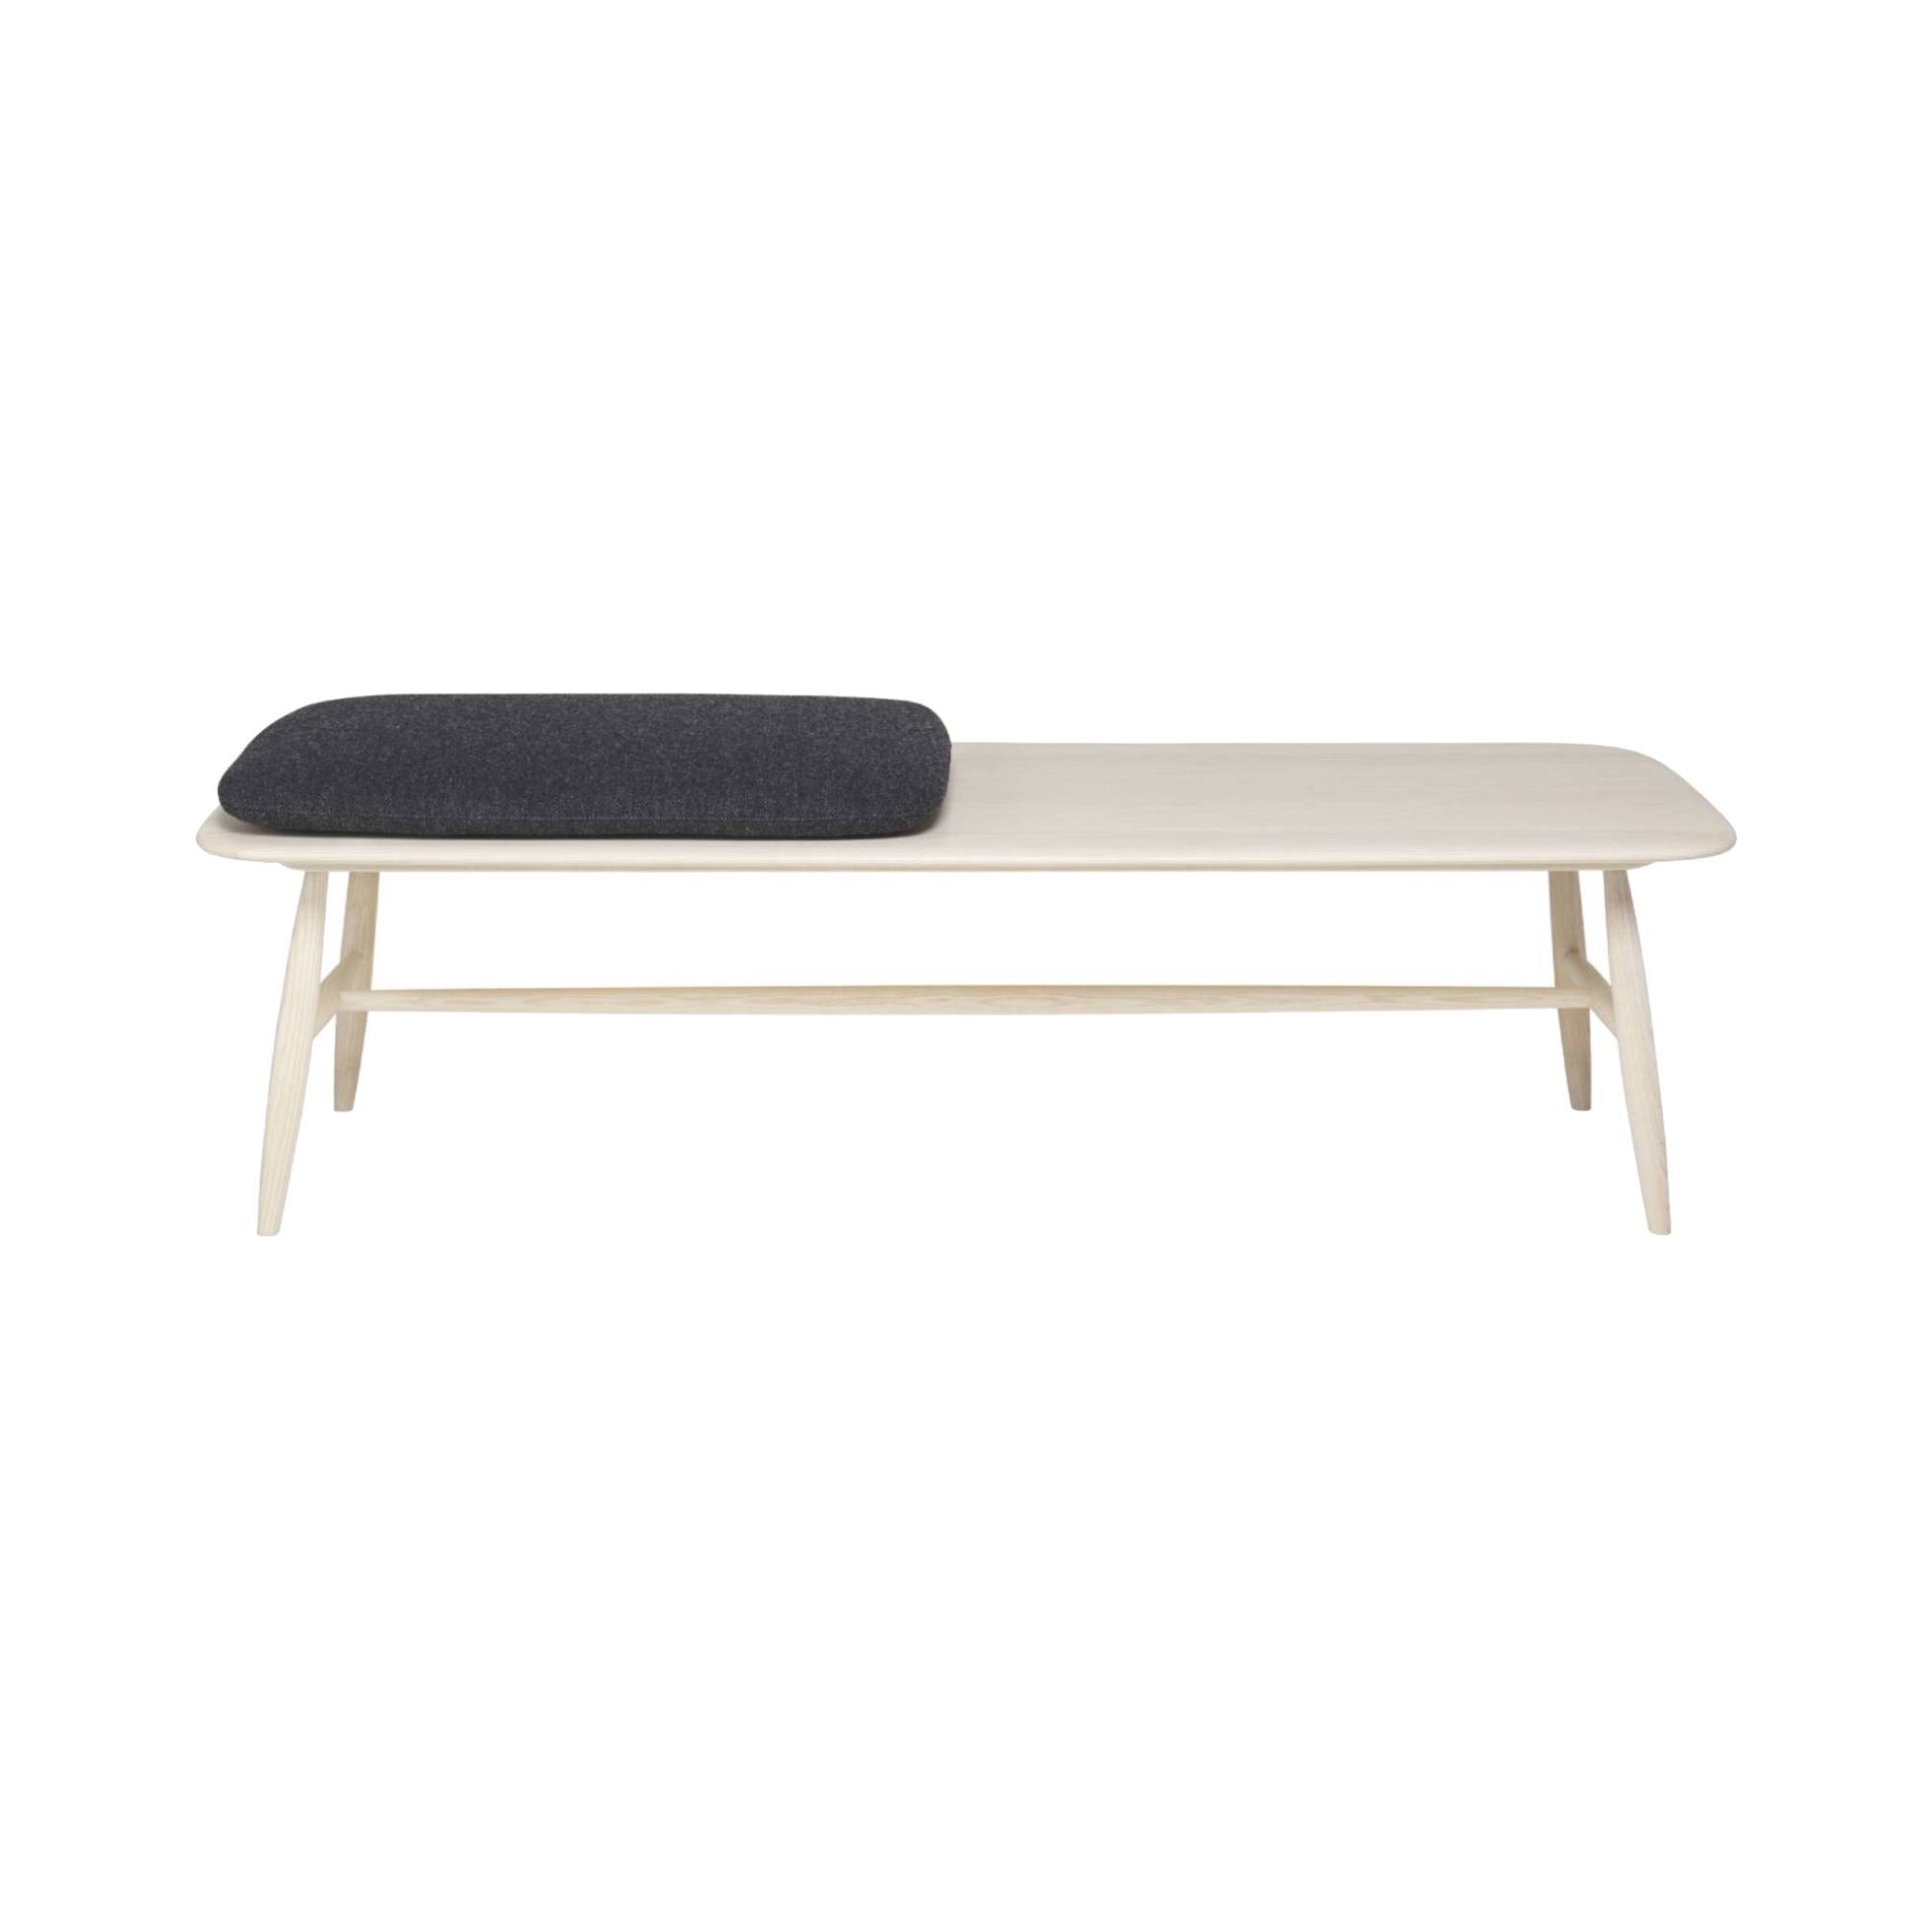 Von Bench with Pad: Natural Ash